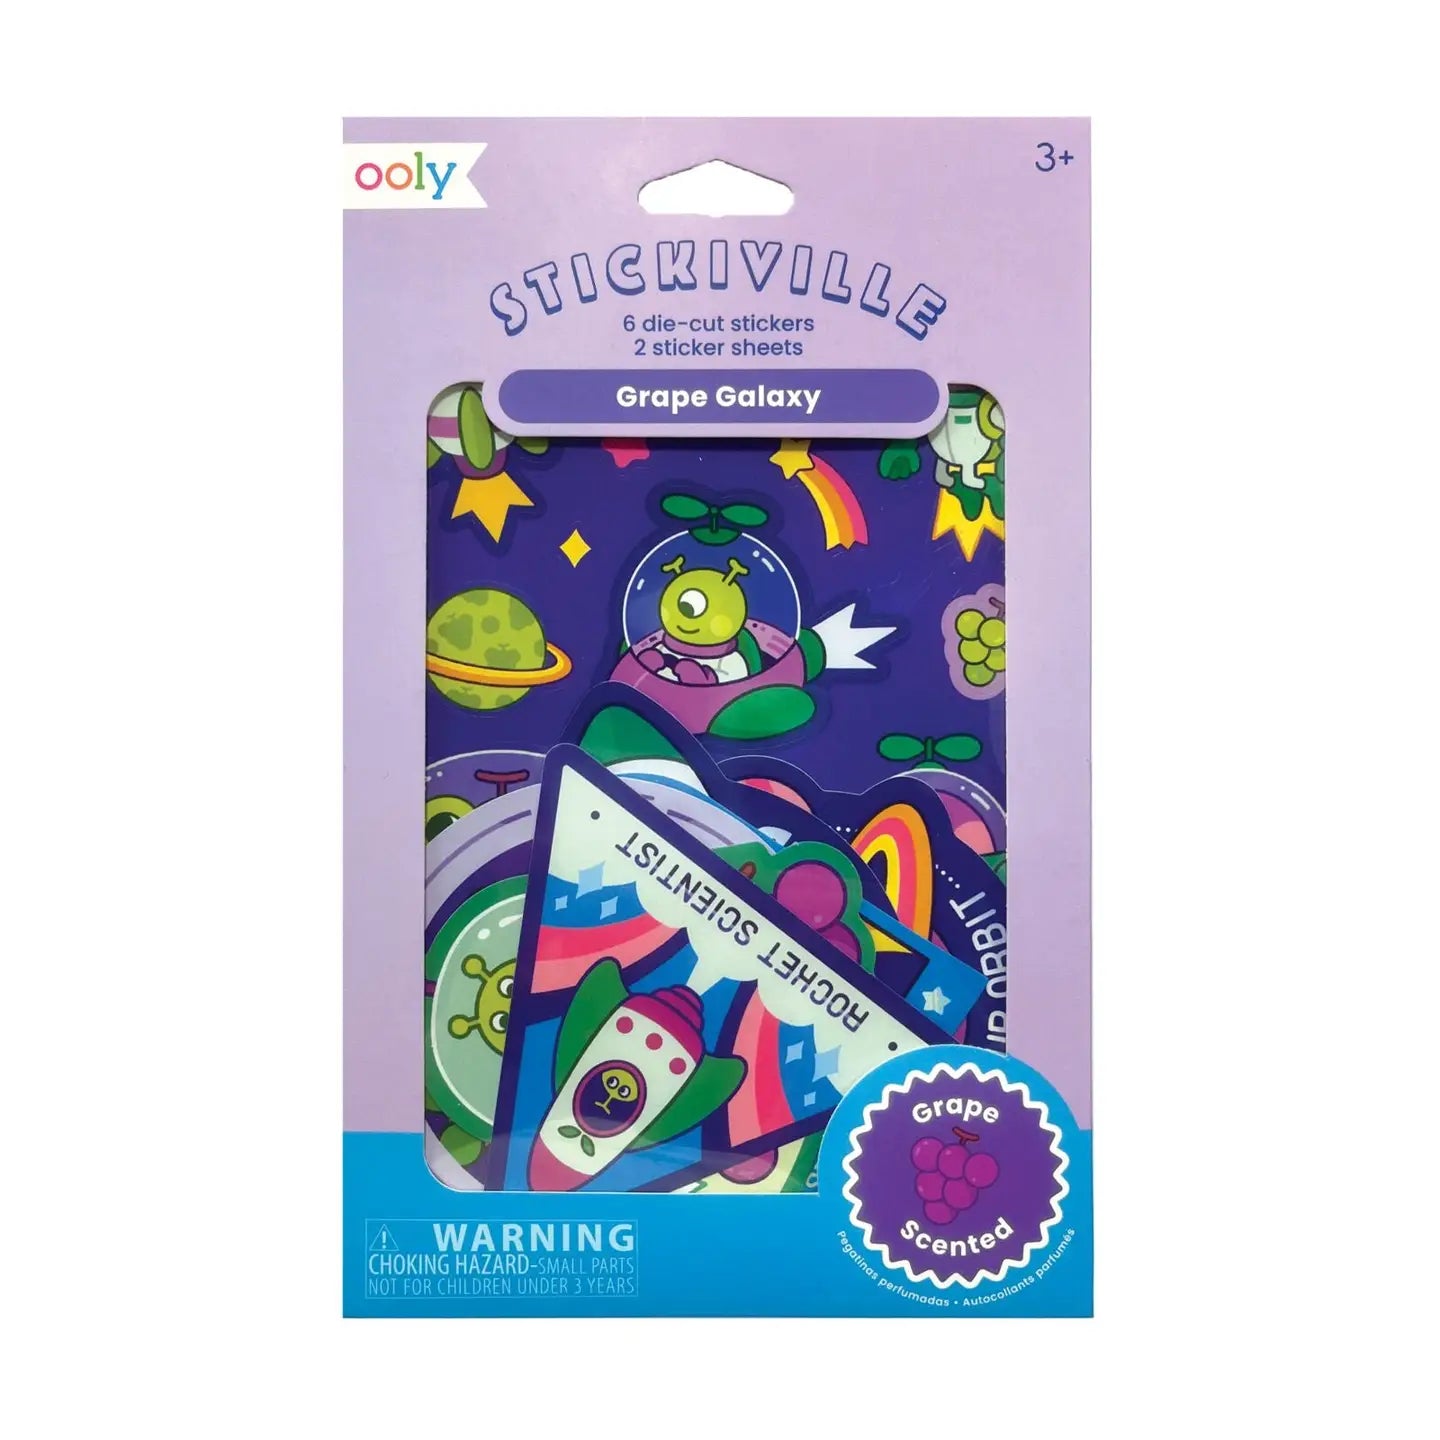 OOLY: Stickiville Stickers: Galaxy Grapes - Scented